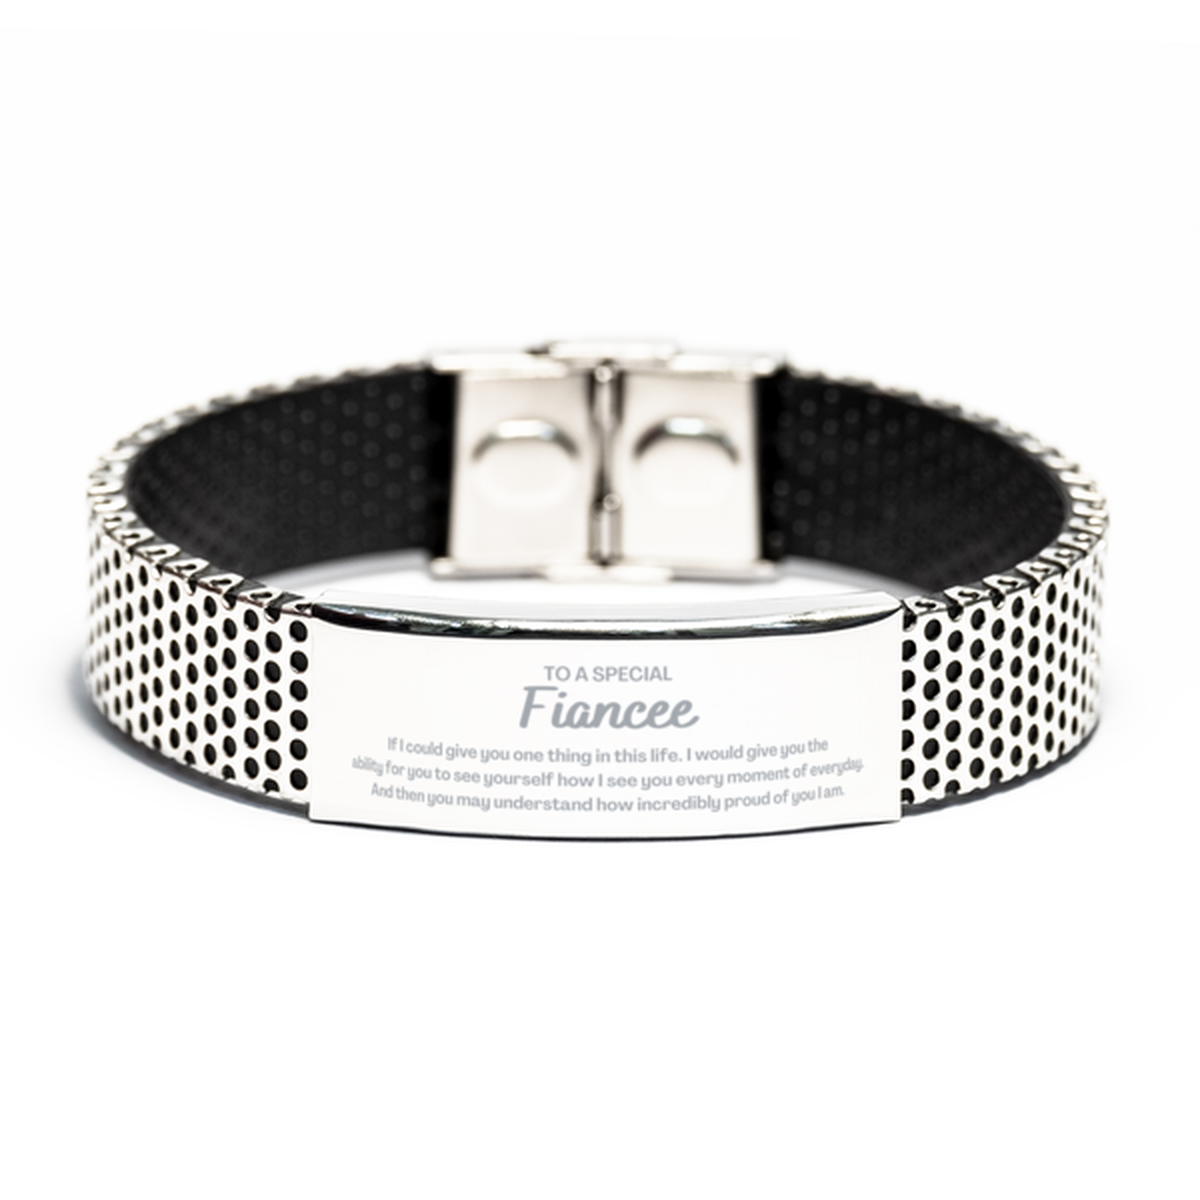 To My Fiancee Stainless Steel Bracelet, Gifts For Fiancee Engraved, Inspirational Gifts for Christmas Birthday, Epic Gifts for Fiancee To A Special Fiancee how incredibly proud of you I am